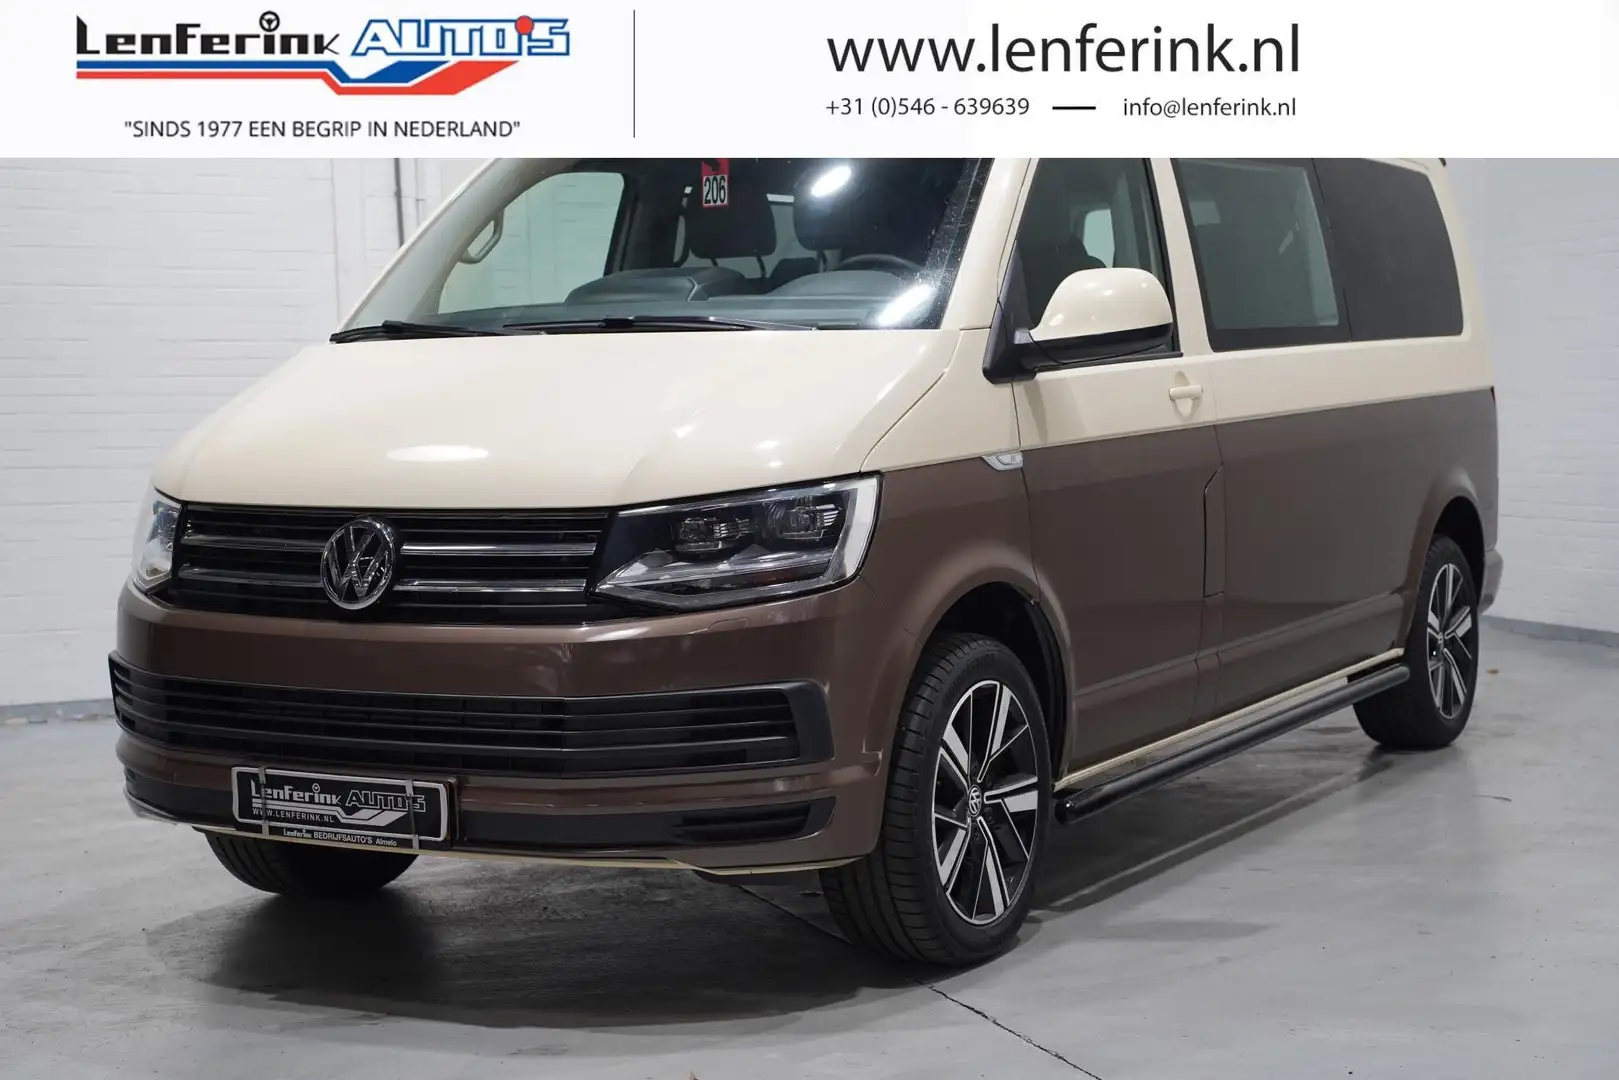 Volkswagen Transporter 2.0 TDI 150 pk Dubbel Cabine Two Tone Bruin Airco Beżowy - 1